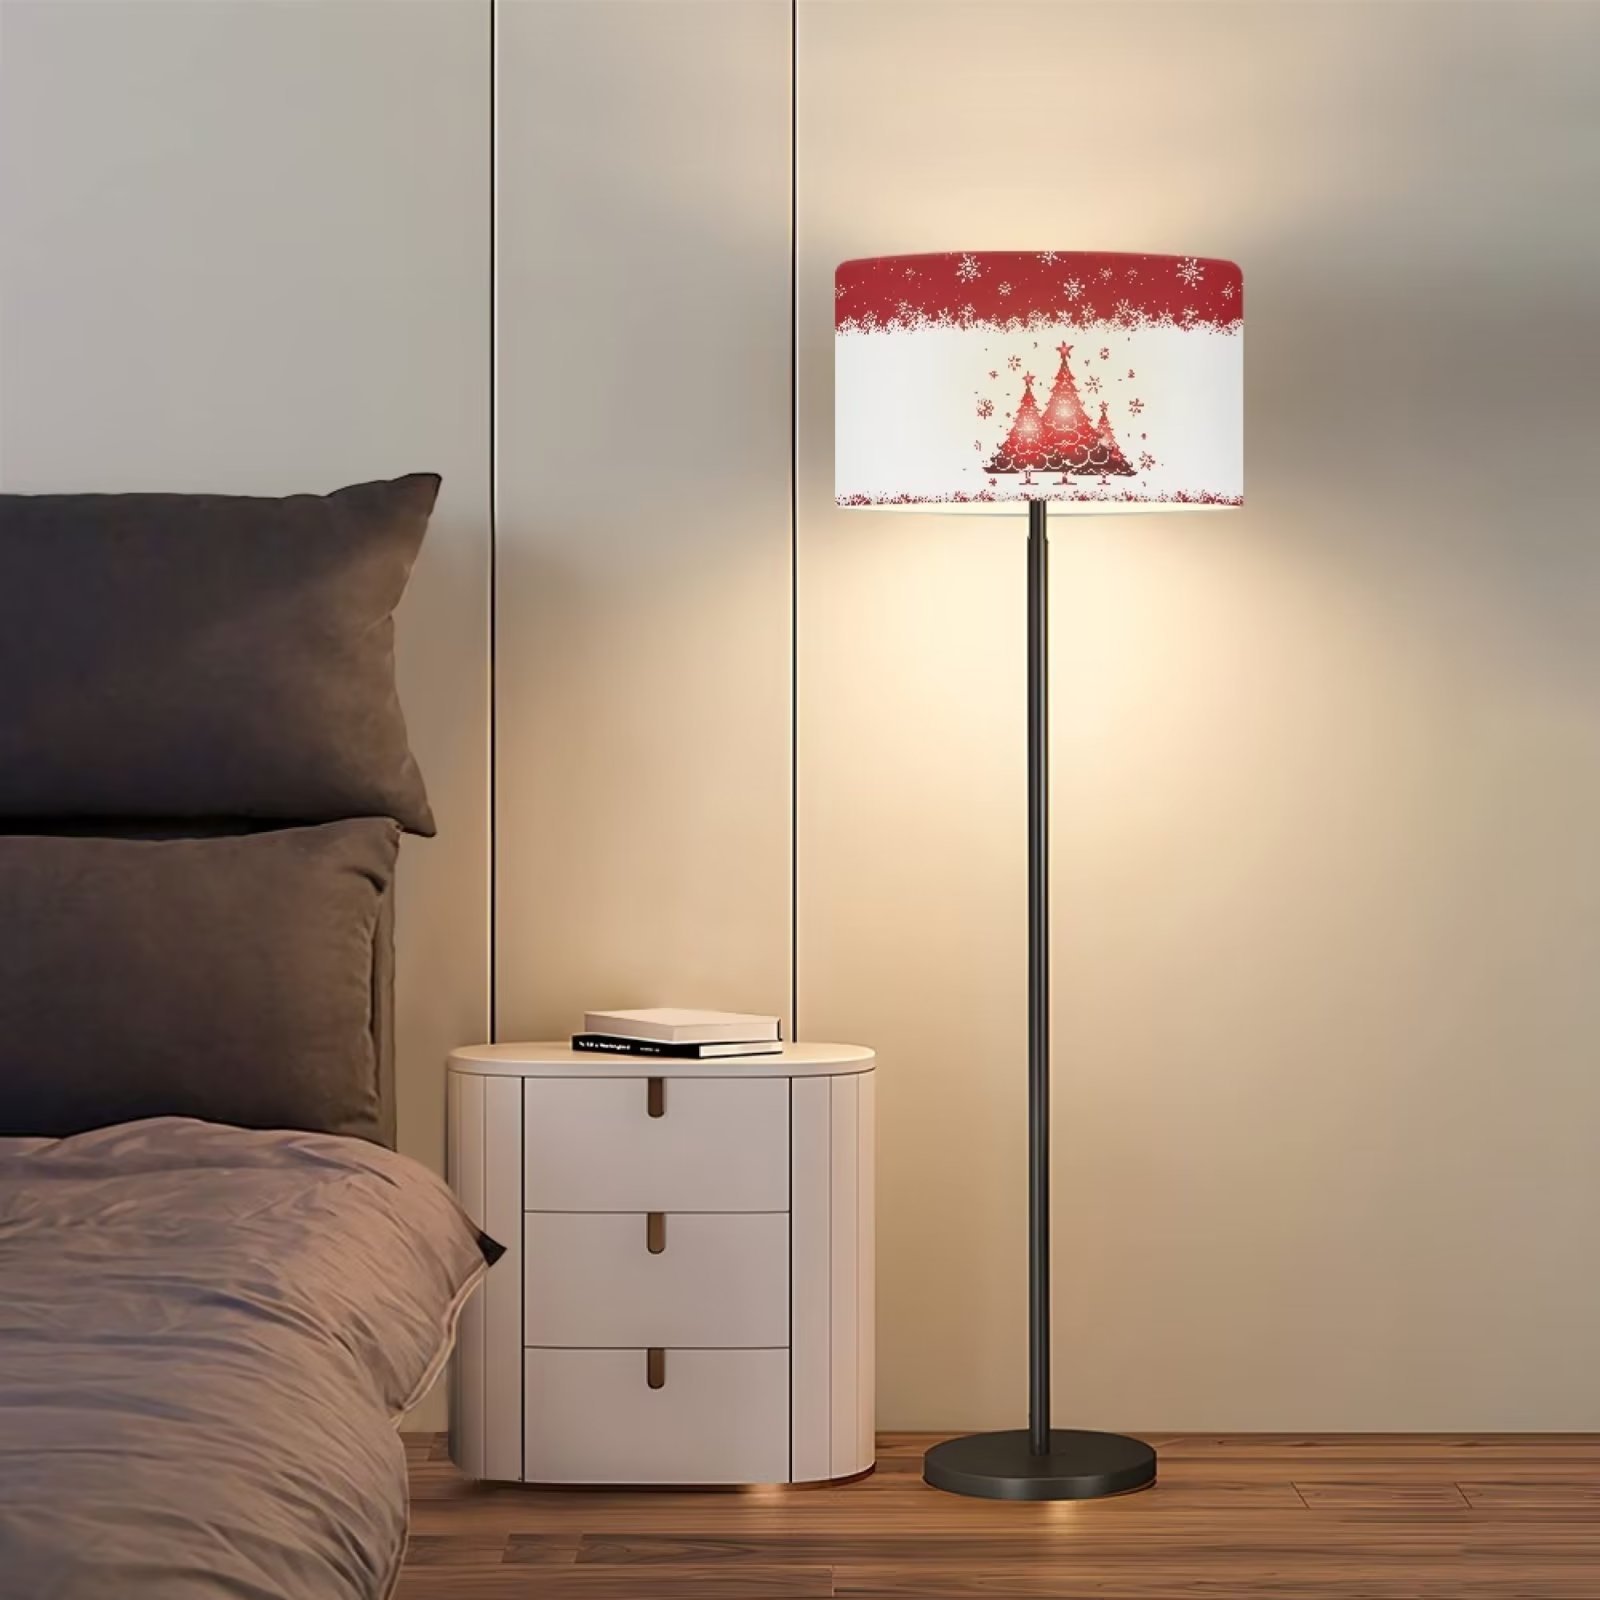 Pzuqiu Christmas Tree Lampshades Set of 2 Barrel Shape Lamp Shade for Bedside Lamp Office Floors Lamp Cylinder PVC Night Light Cover Family Friend Gifts,8.3 Inch Height - image 3 of 8